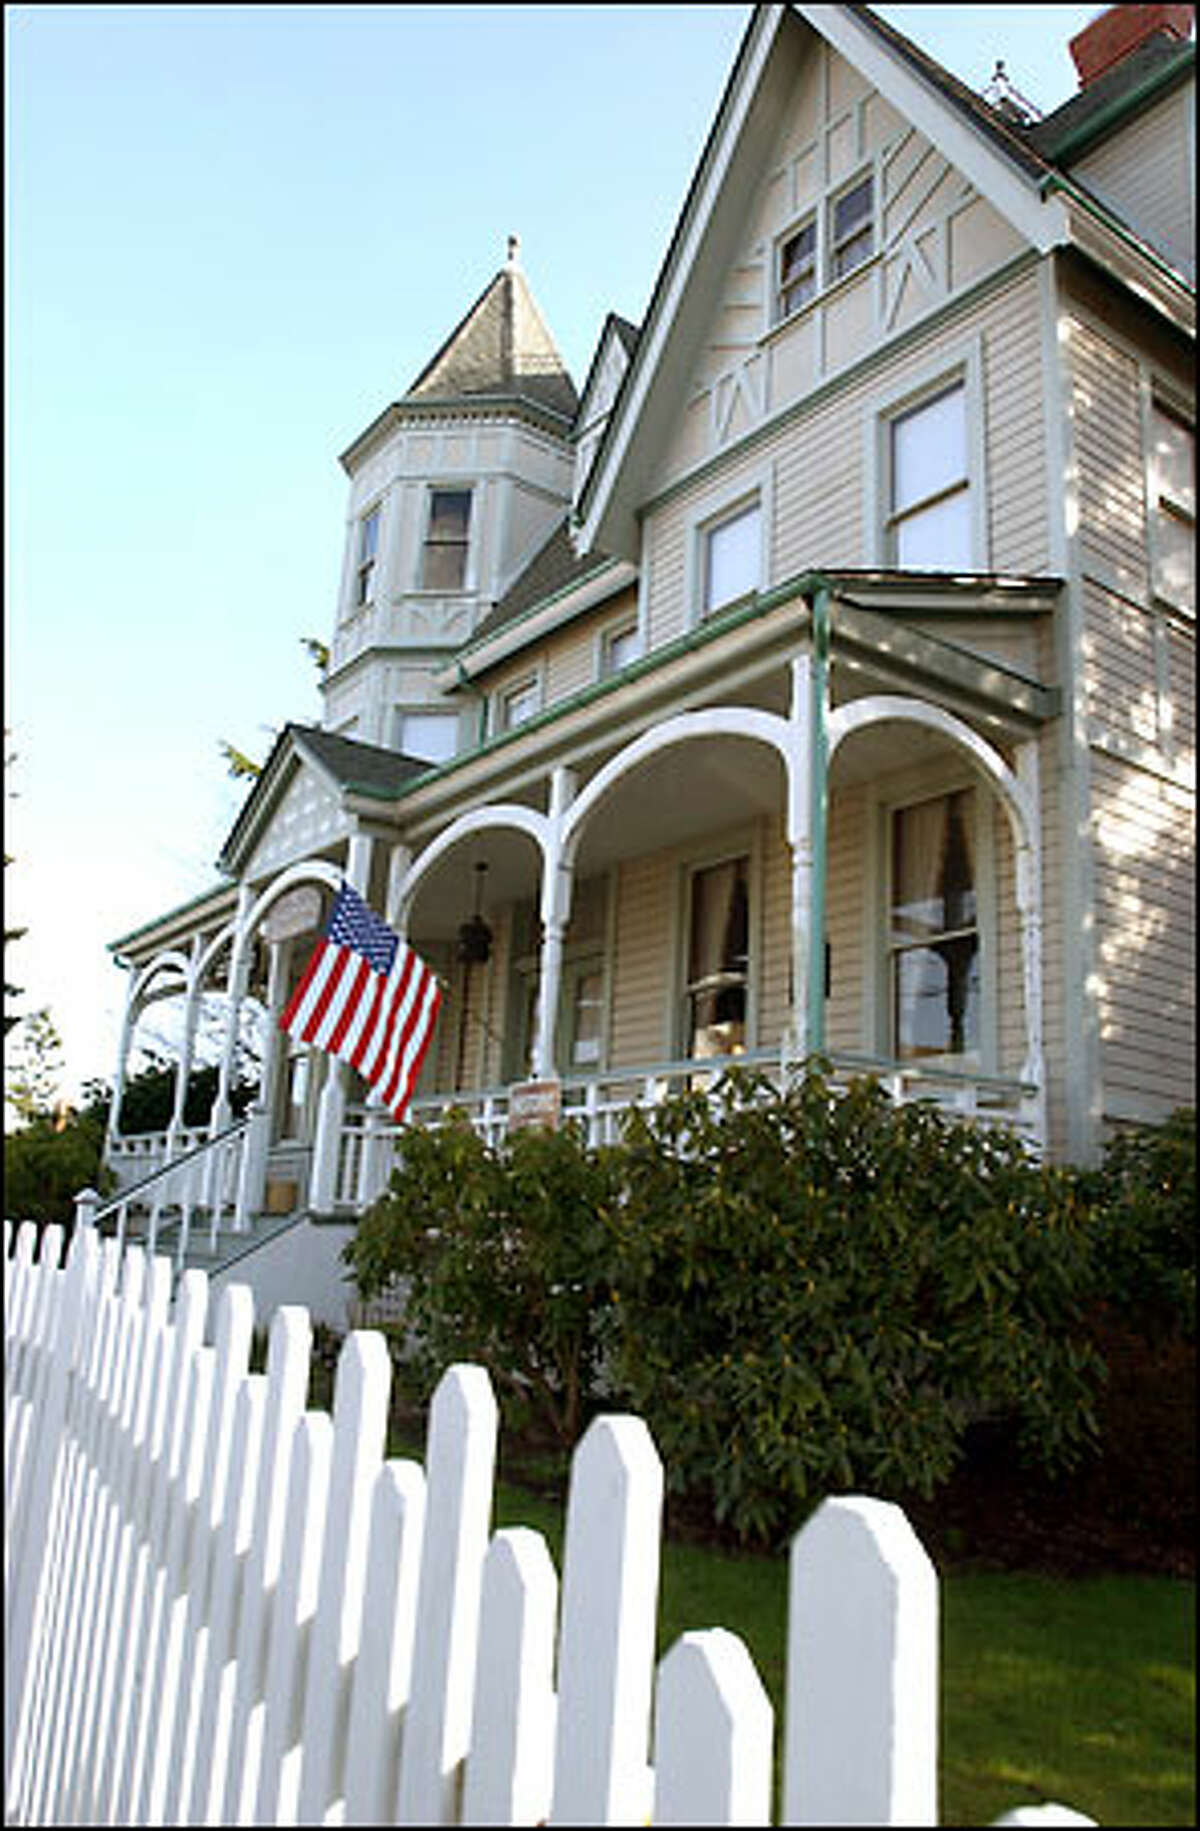 The Historic Gaches Mansion in La Conner Washington. It's currently owned by the city and is occupied by the La Conner Quilt Museum.